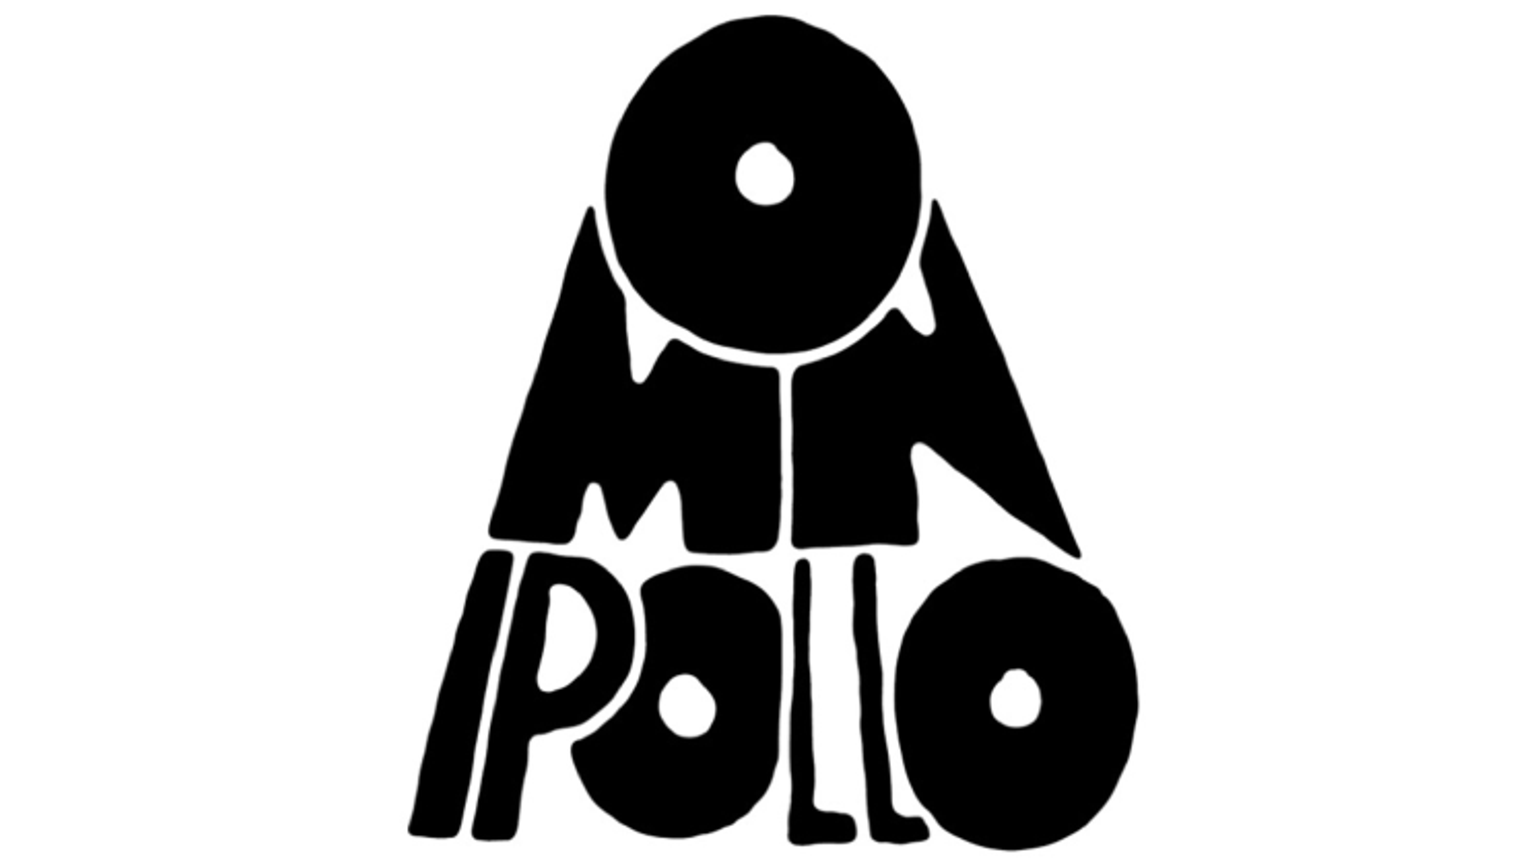 thumbnail for blog article named: Omnipollo: Craft Beer + Art = Genius